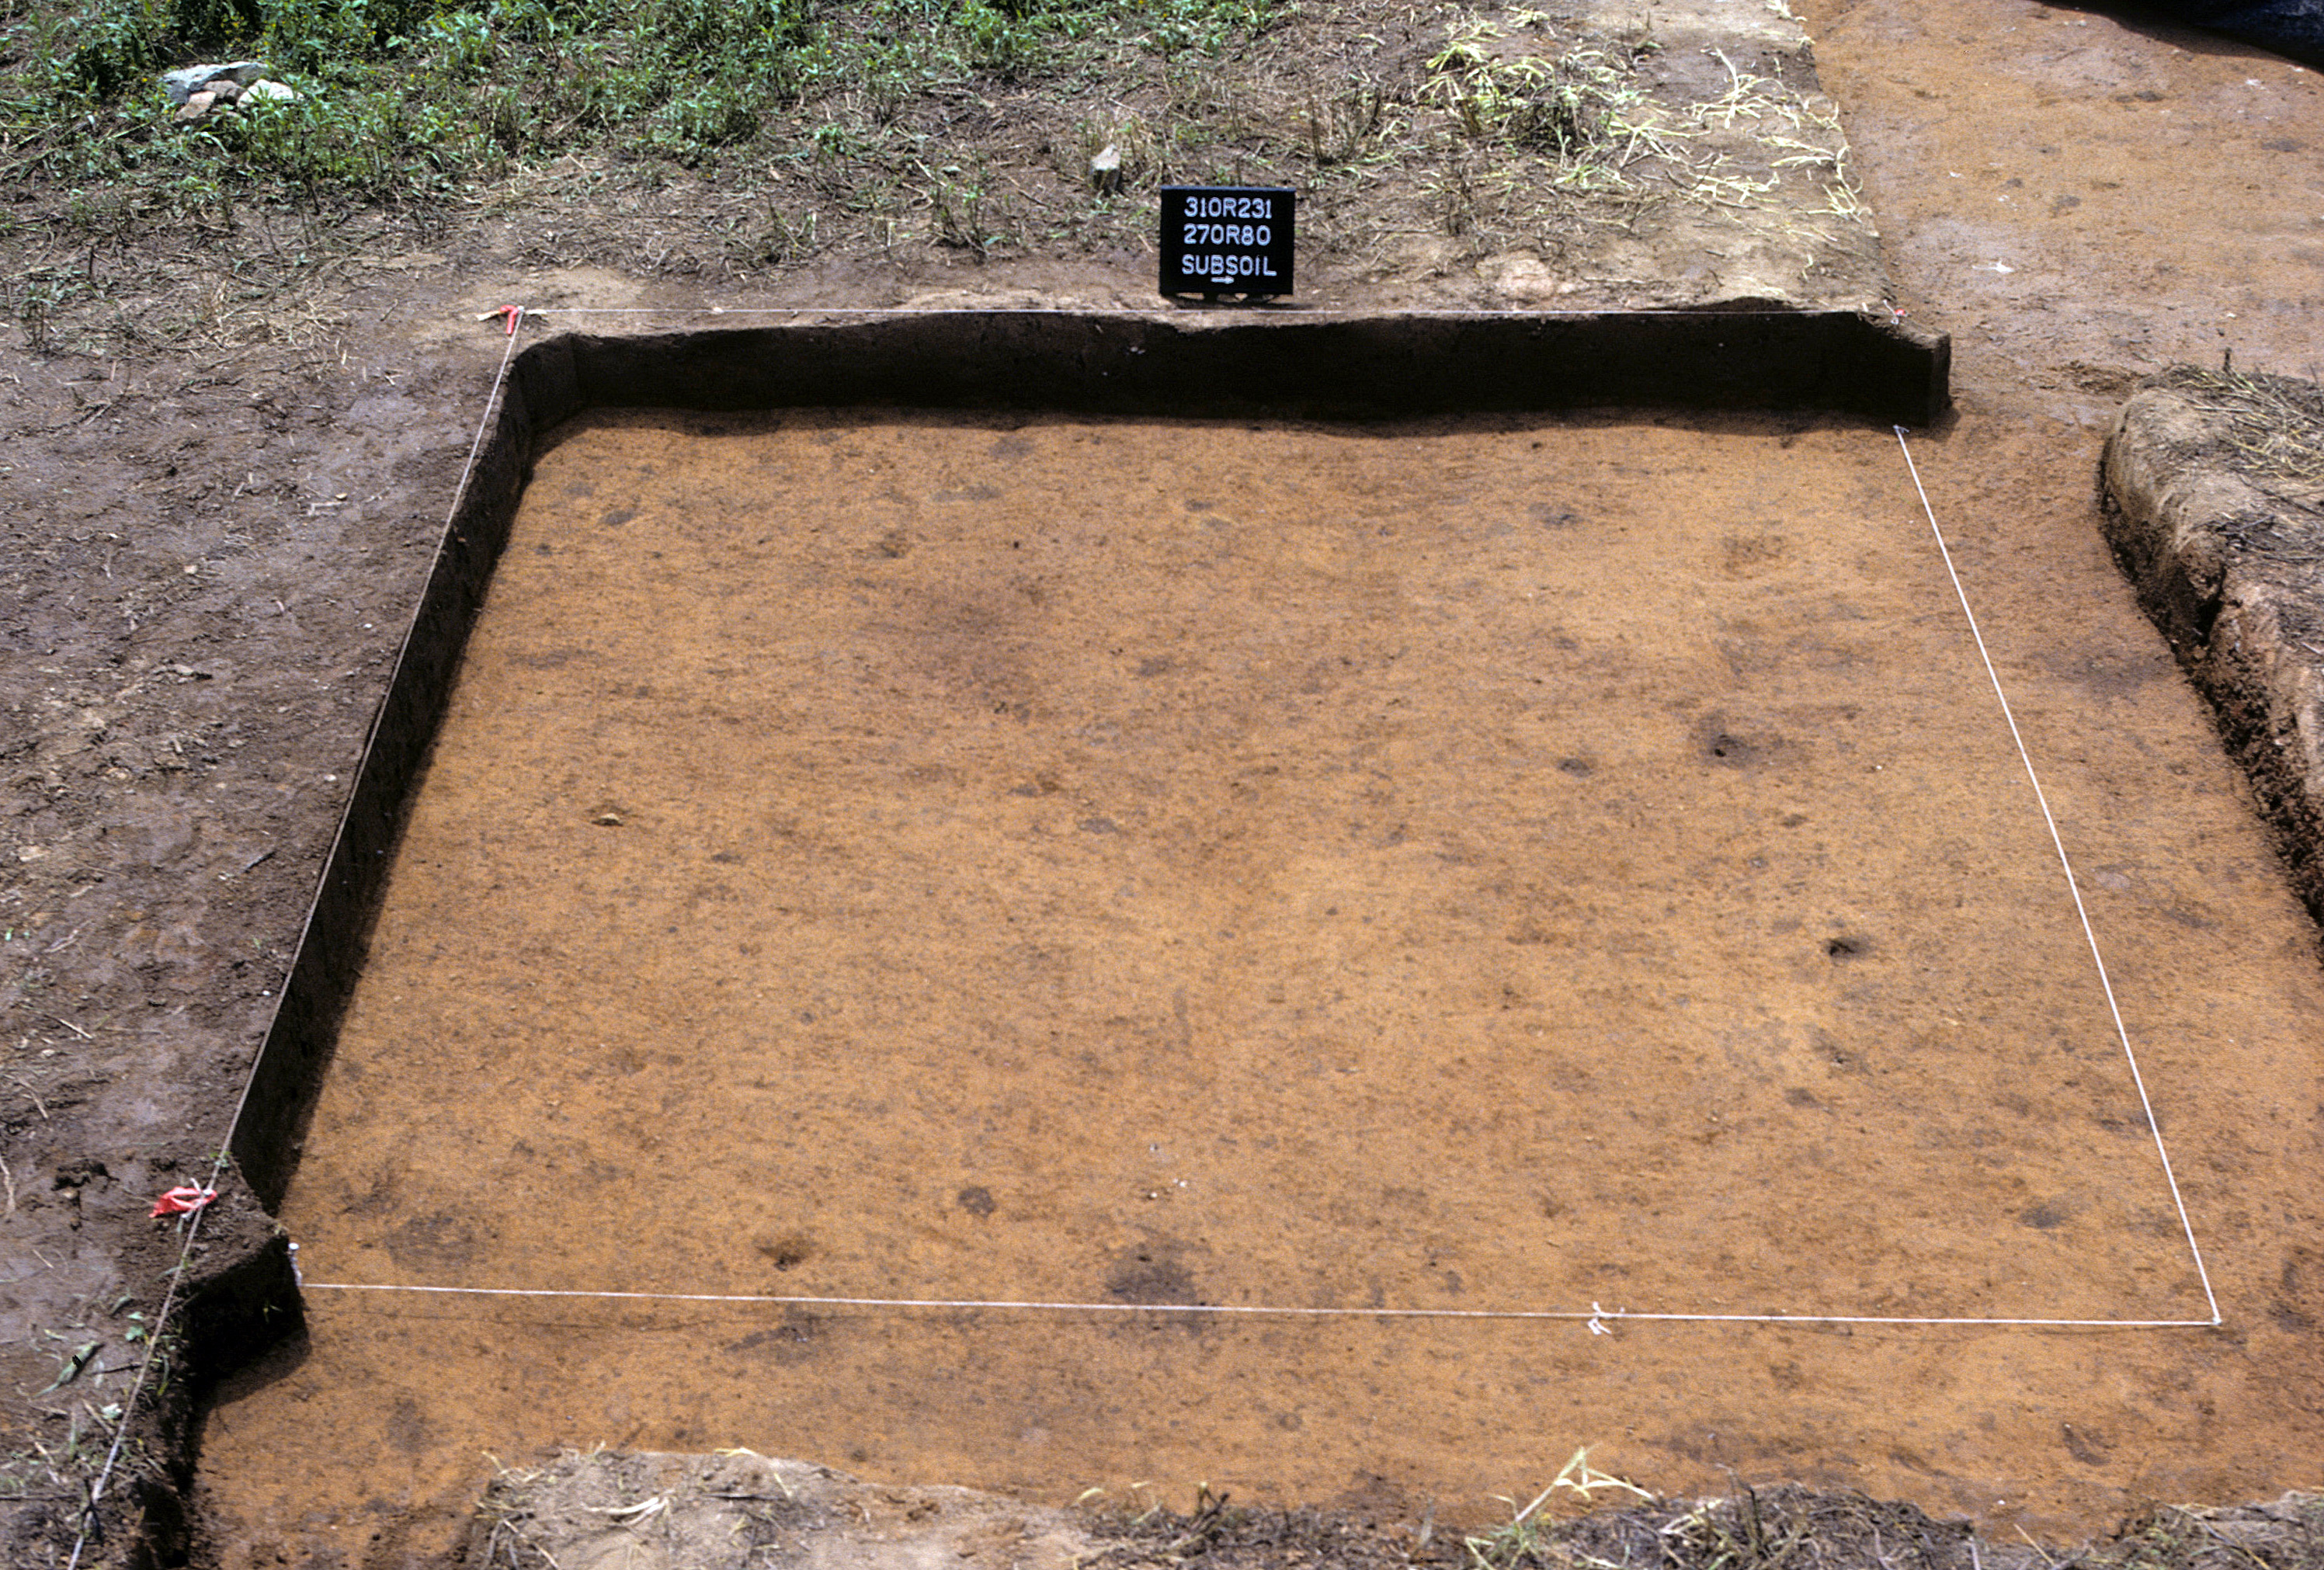 Figure 941. Sq. 270R80 at top of subsoil (view to west).